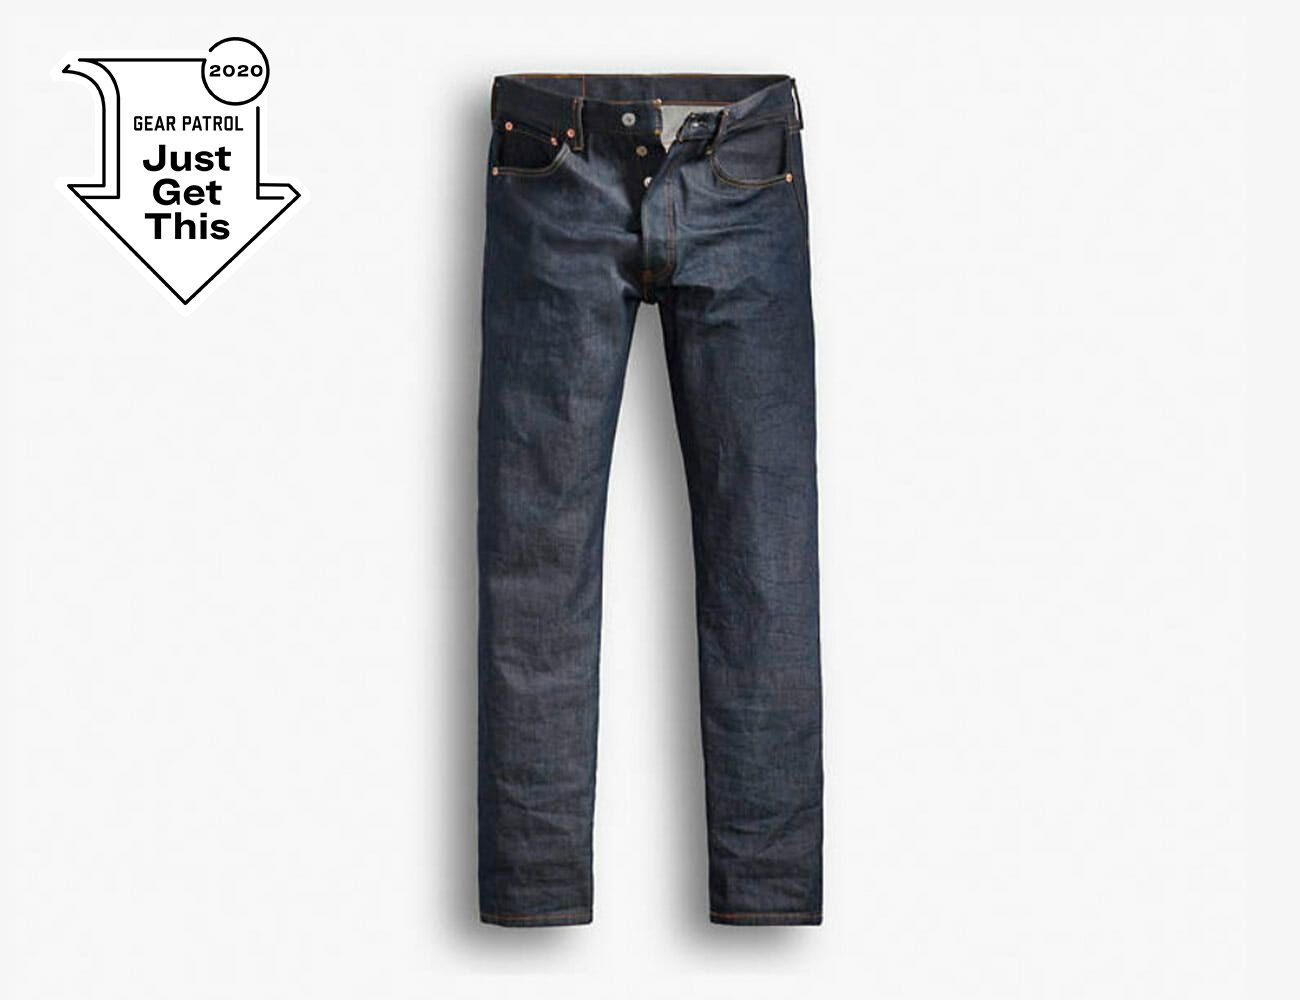 a clothing company produces a new line of inexpensive jeans